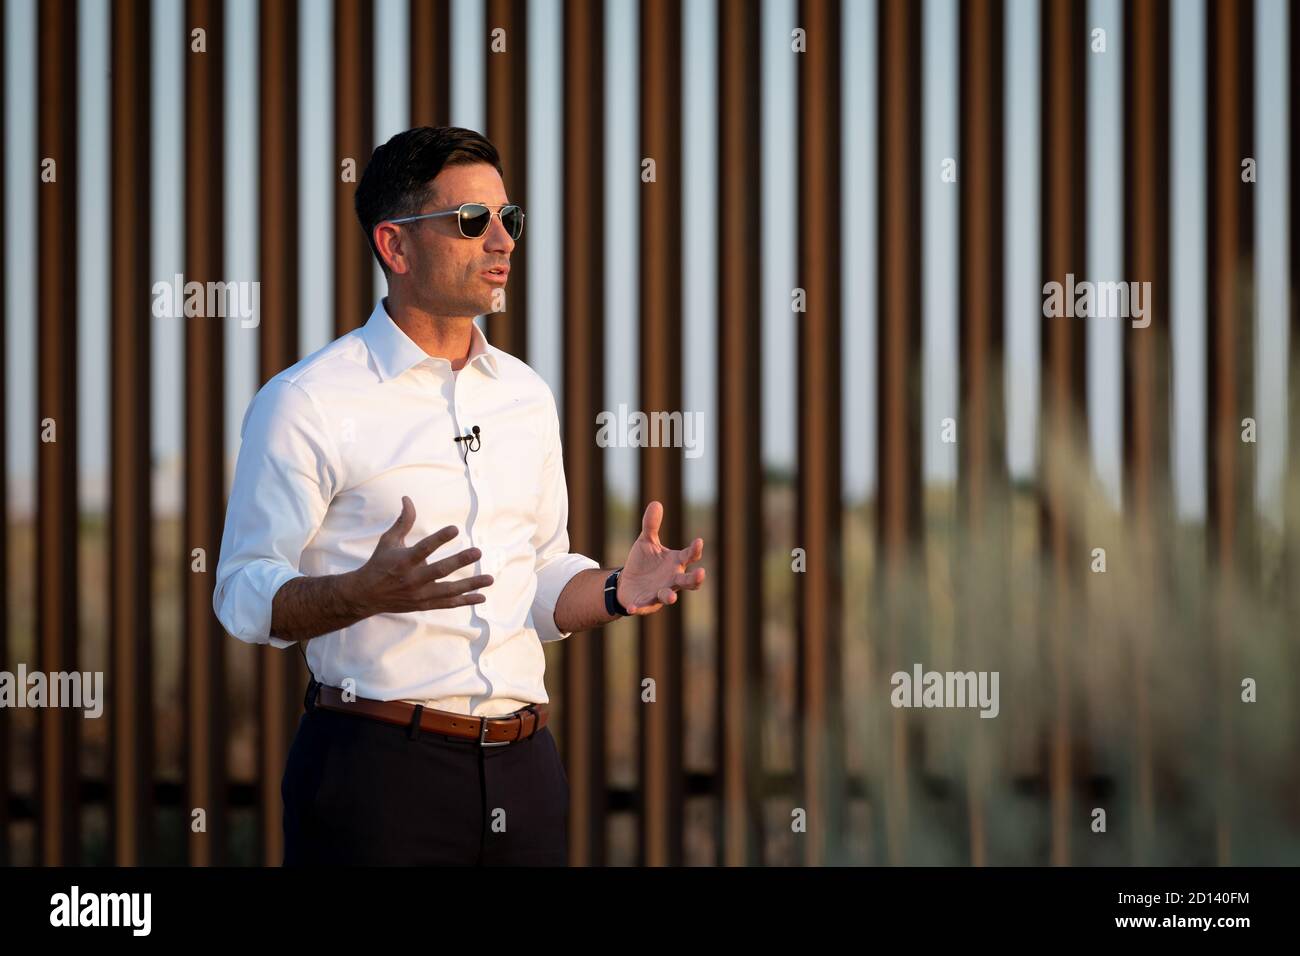 Acting Department of Homeland Security Secretary Chad Wolf is interviewed by the media at the U.S. - Mexico border wall in El Paso, Texas, August 26, 2020. CBP Stock Photo